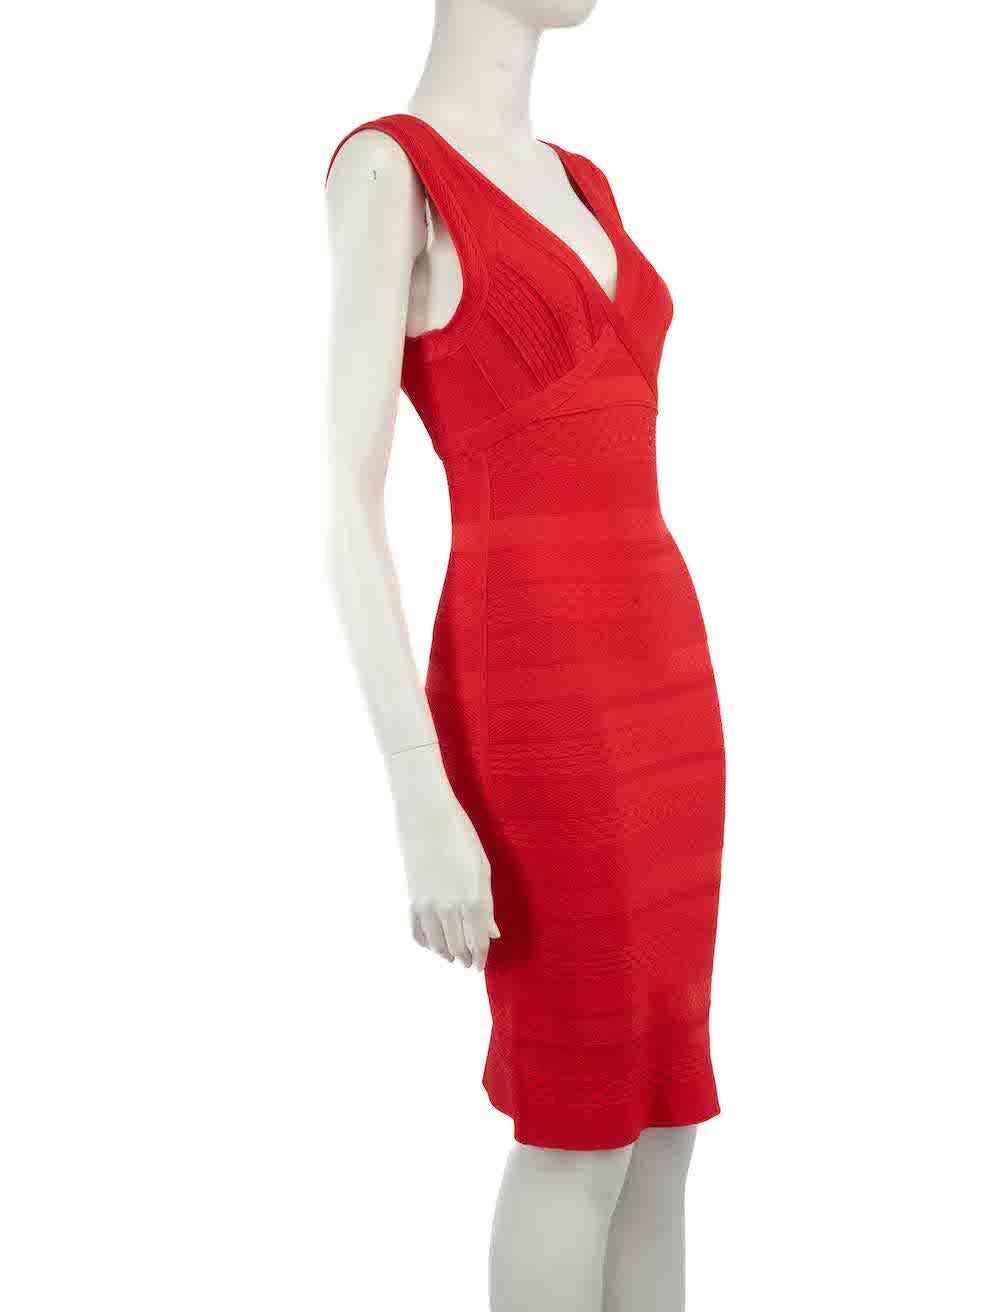 CONDITION is Very good. Minimal wear to dress is evident. Some light discolouration to neckline and two small marks to the front under bust and near left side hem on this used Herve Leger designer resale item.
 
 
 
 Details
 
 
 Red
 
 Rayon
 
